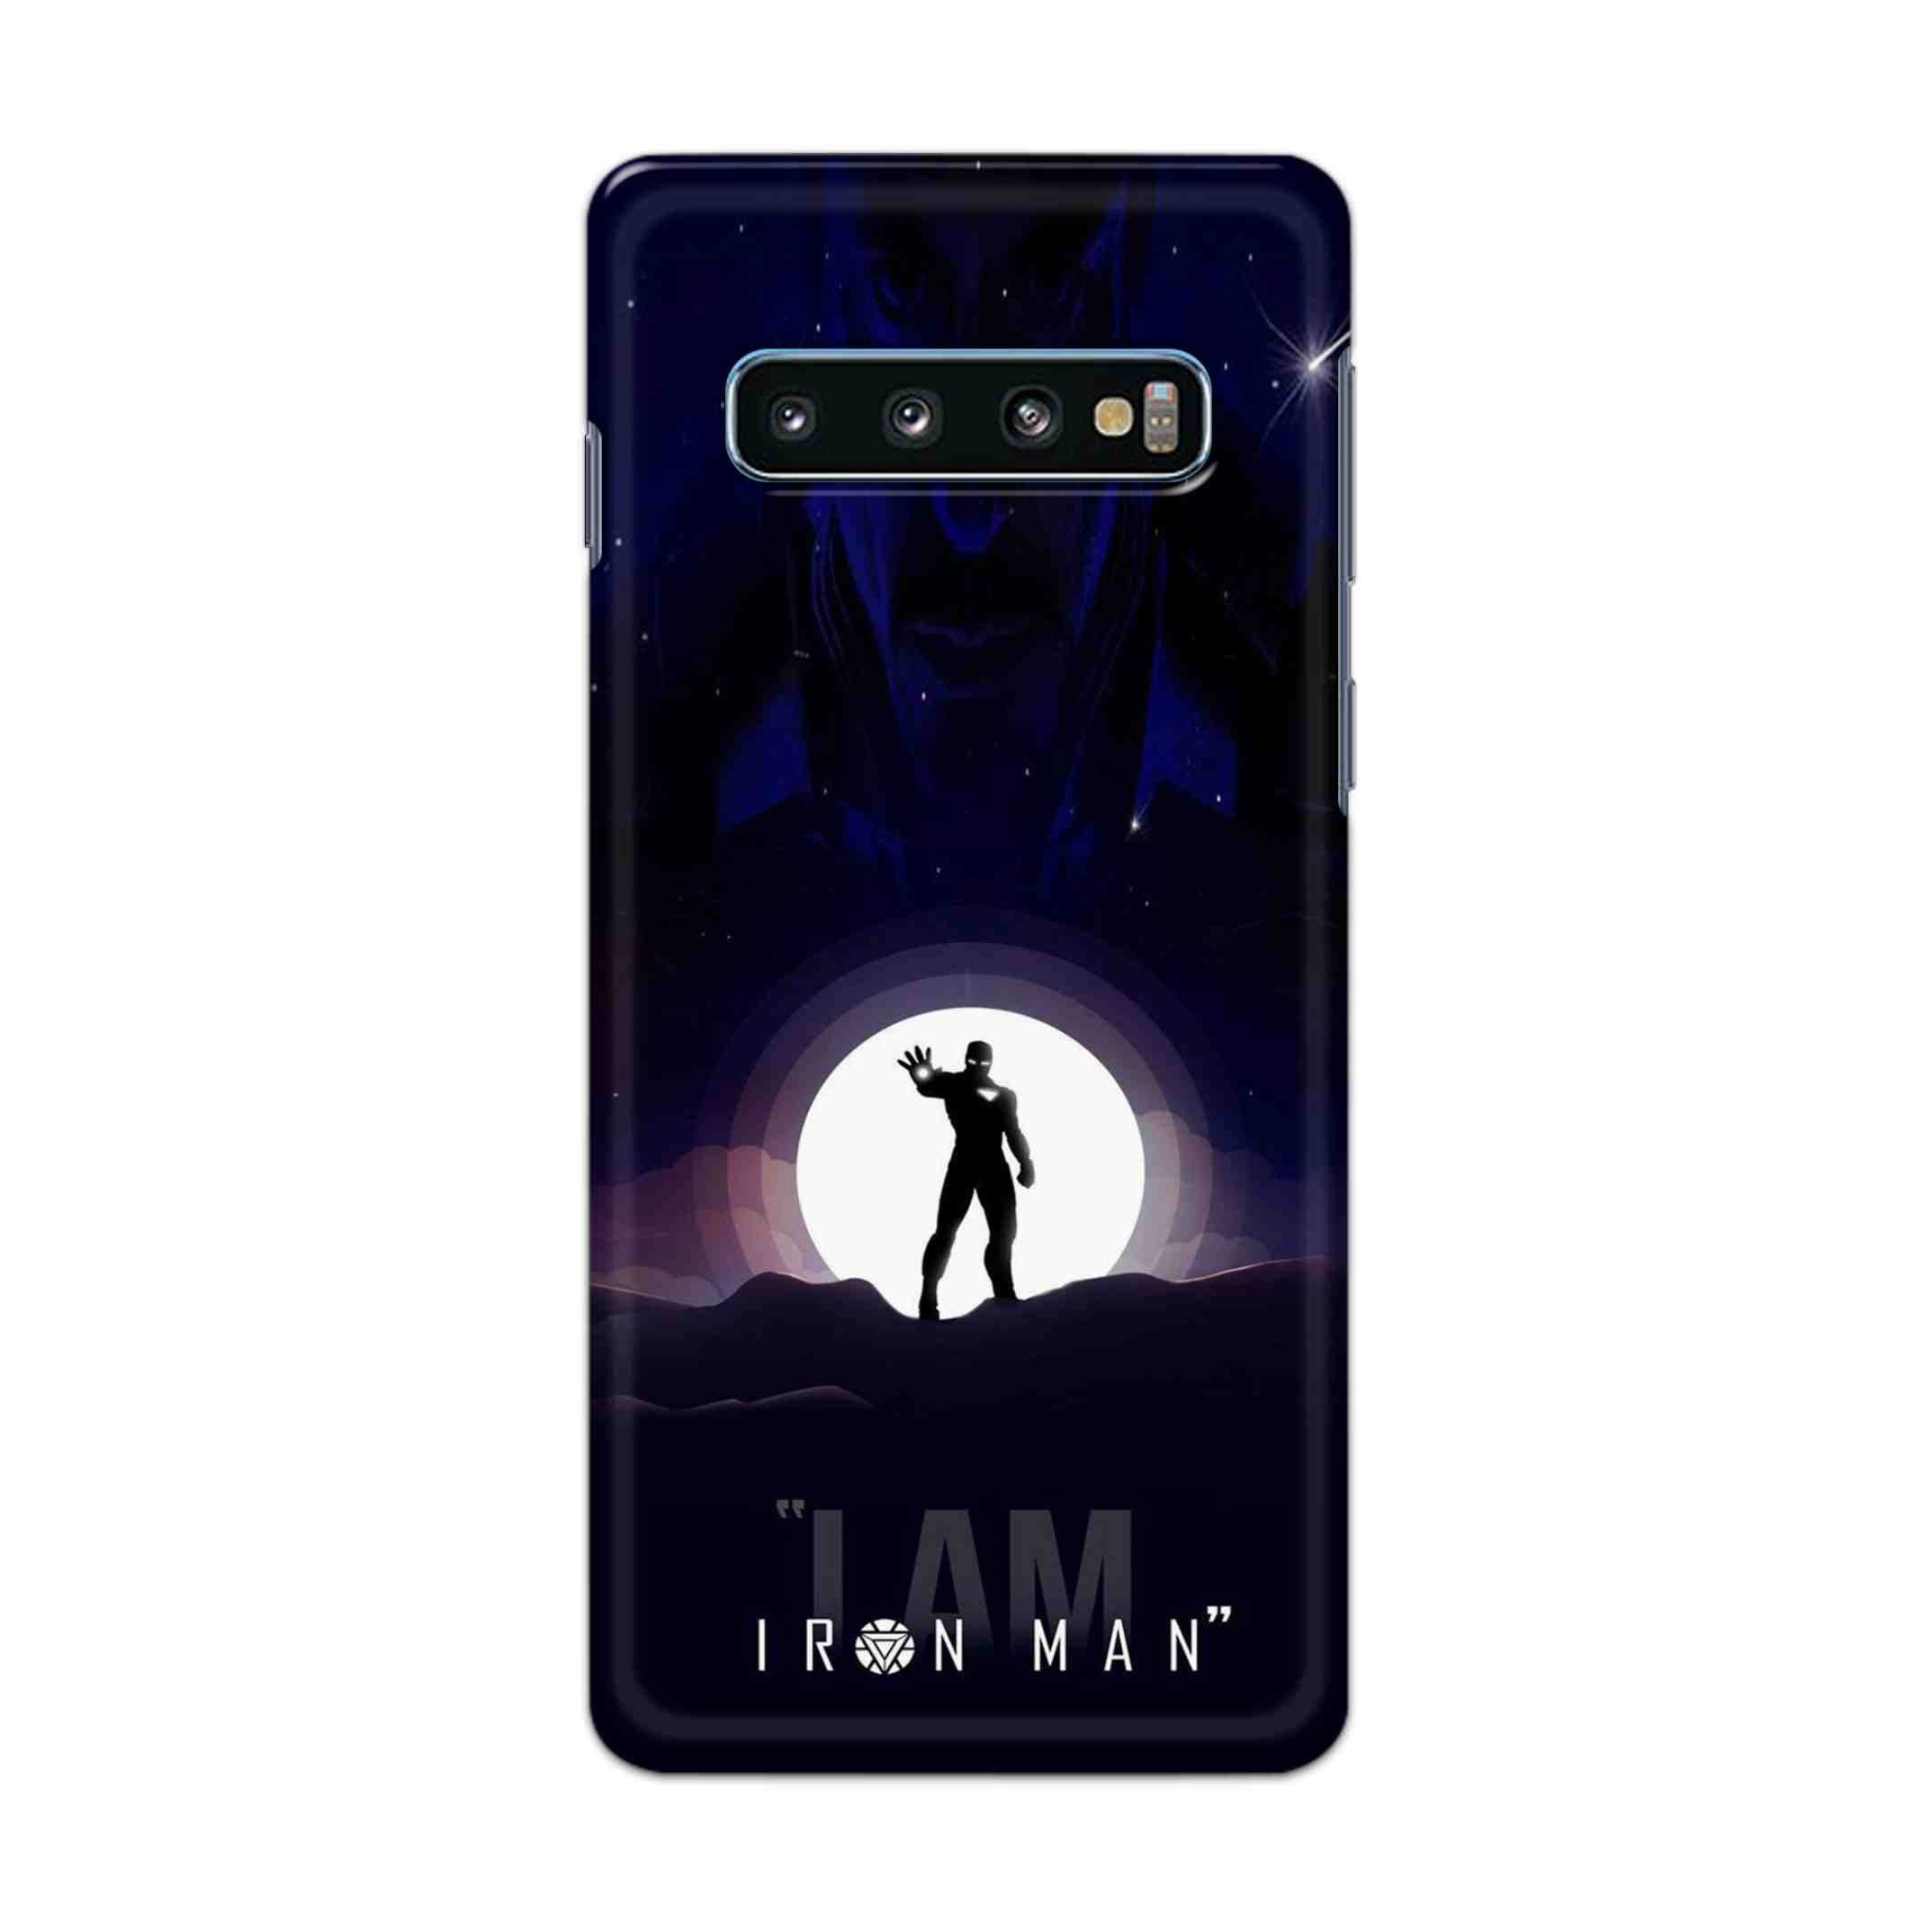 Buy I Am Iron Man Hard Back Mobile Phone Case Cover For Samsung Galaxy S10 Plus Online